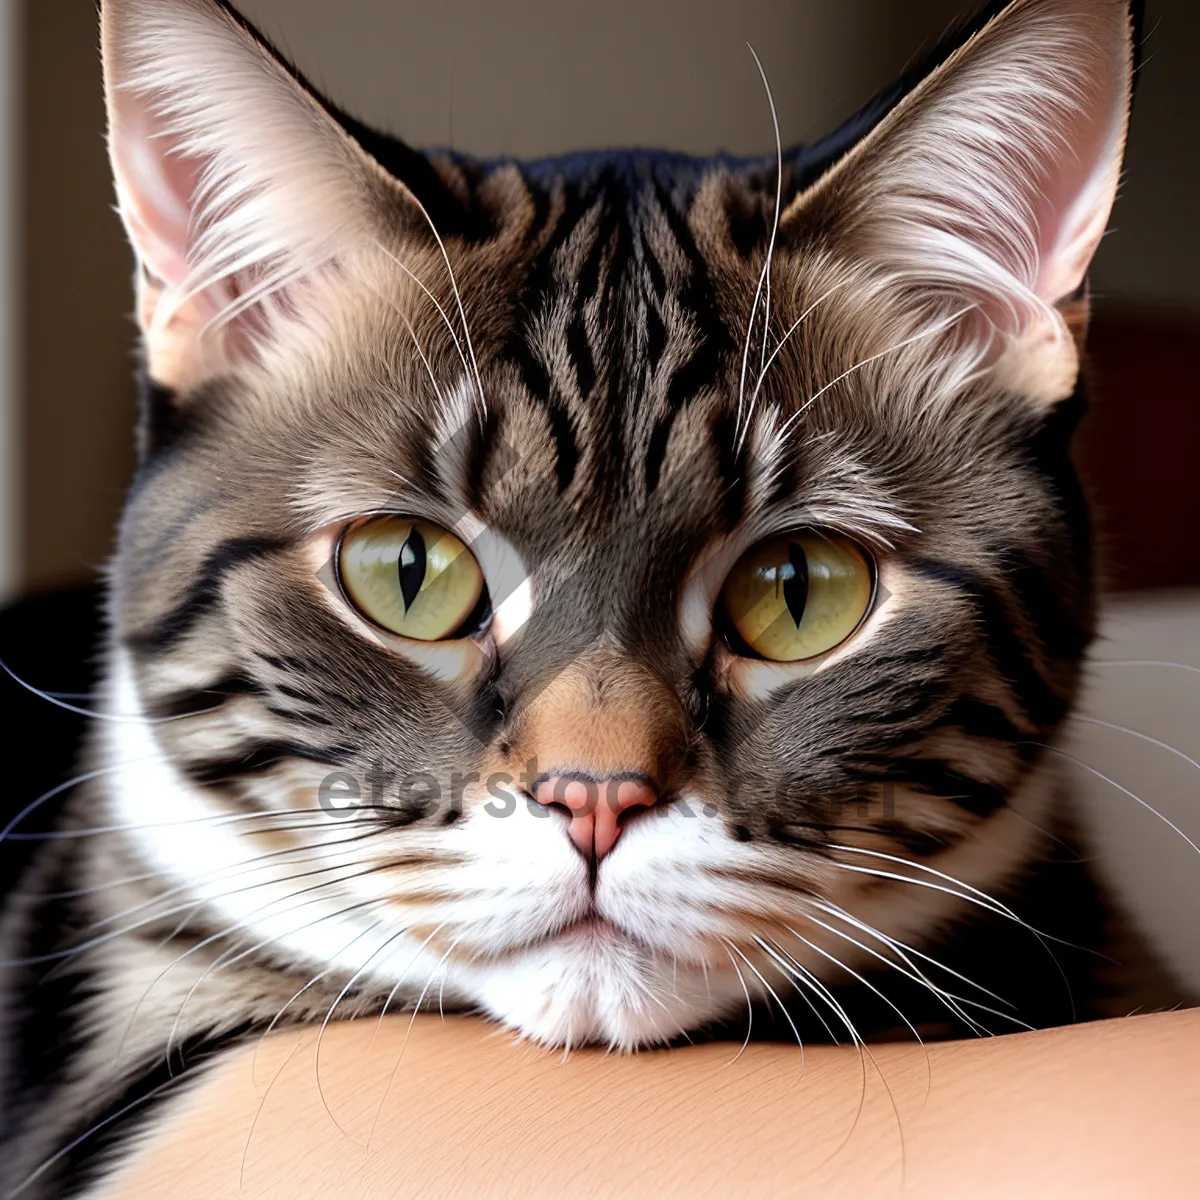 Picture of Tabby Cat with Cute Whiskers and Fluffy Fur